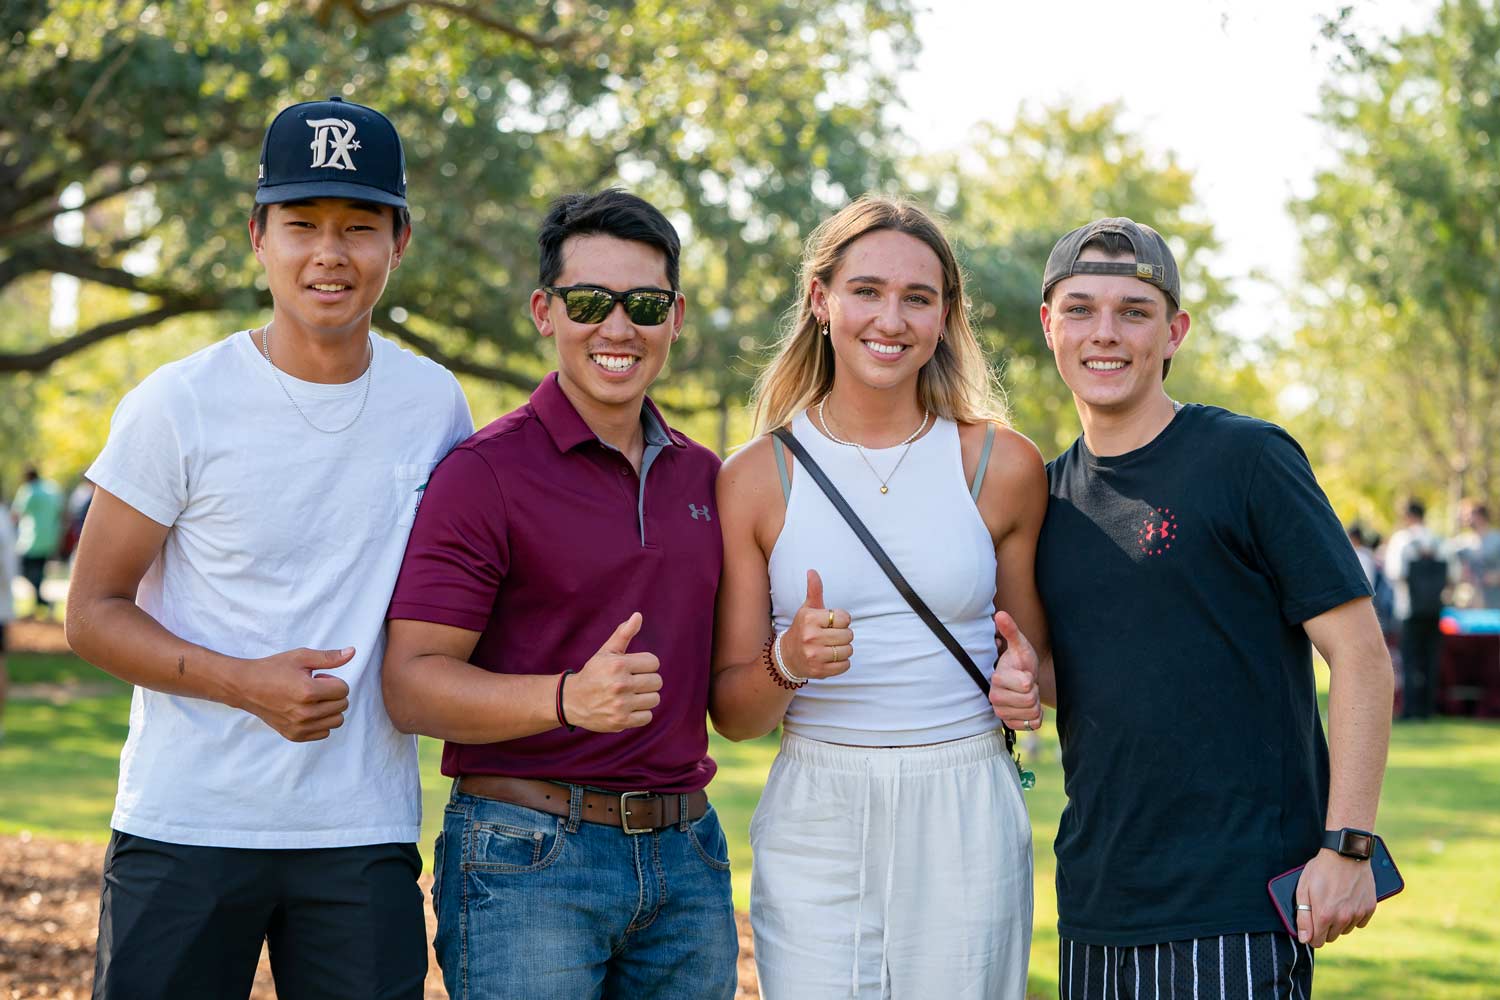 Texas A&M Students posing for a photo at 91Ƶ Park